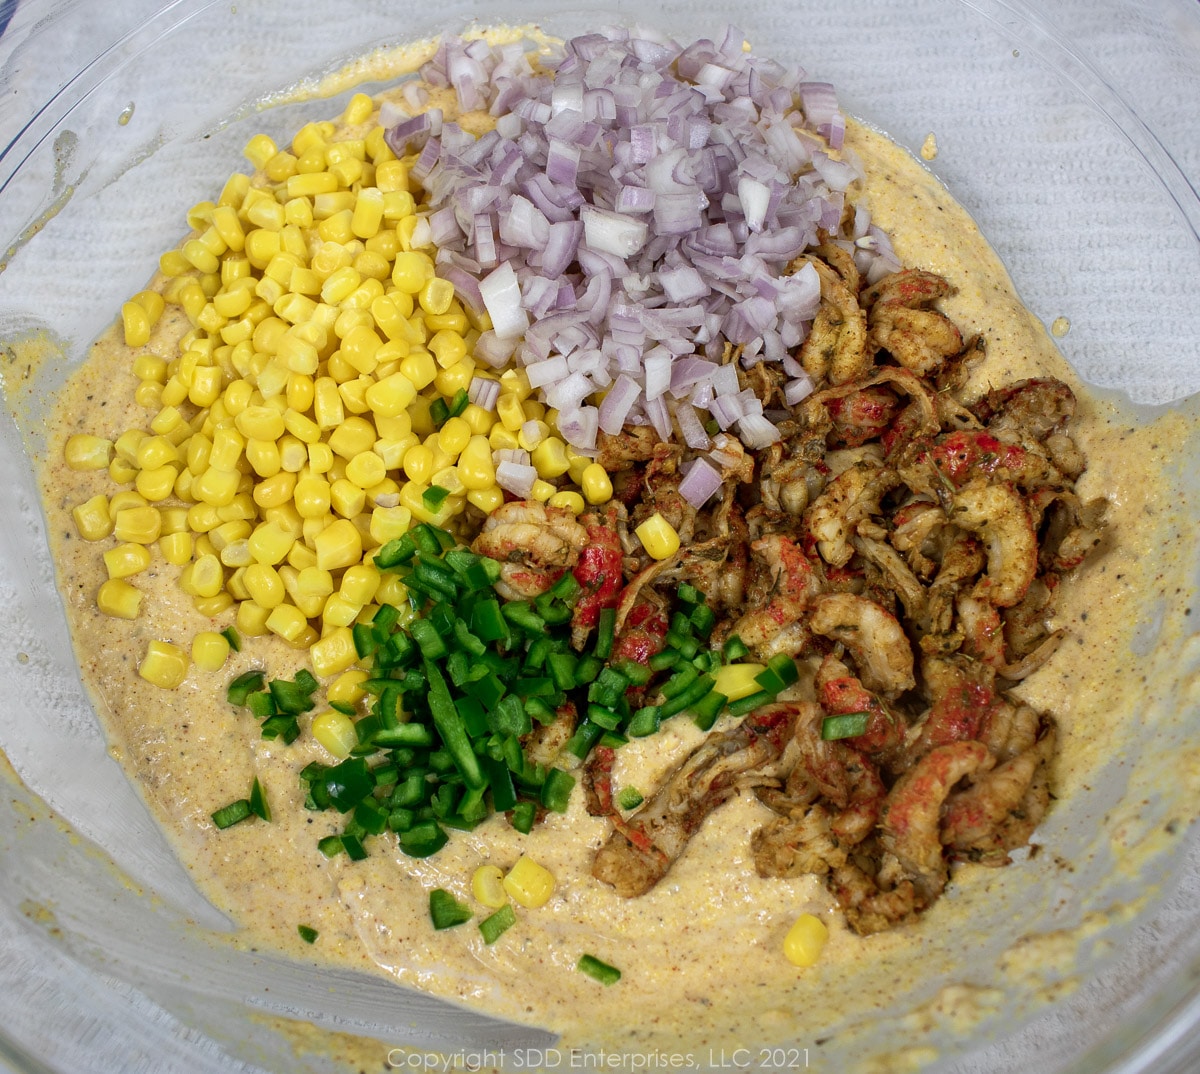 Corn, crawfish tails and onions being combined with batter